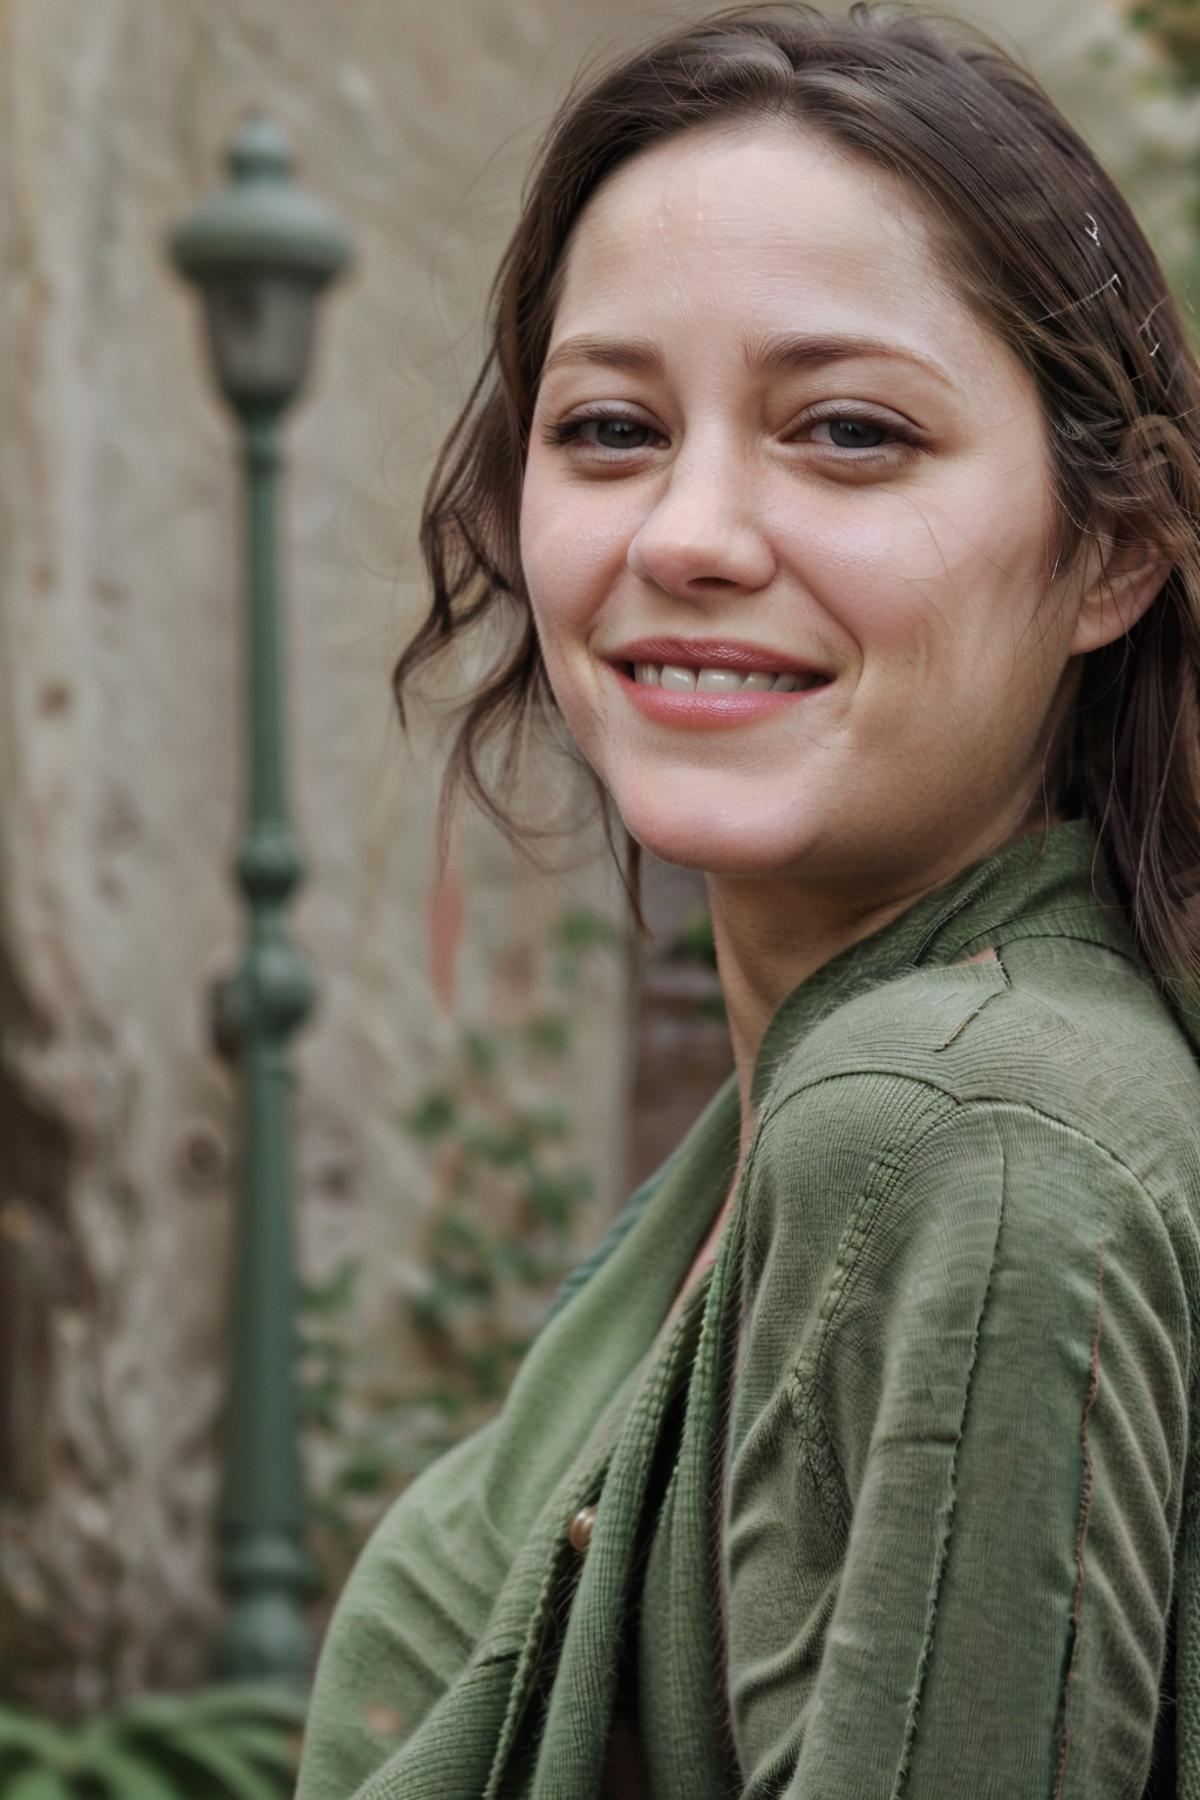 Marion Cotillard image by formertwitteremployee